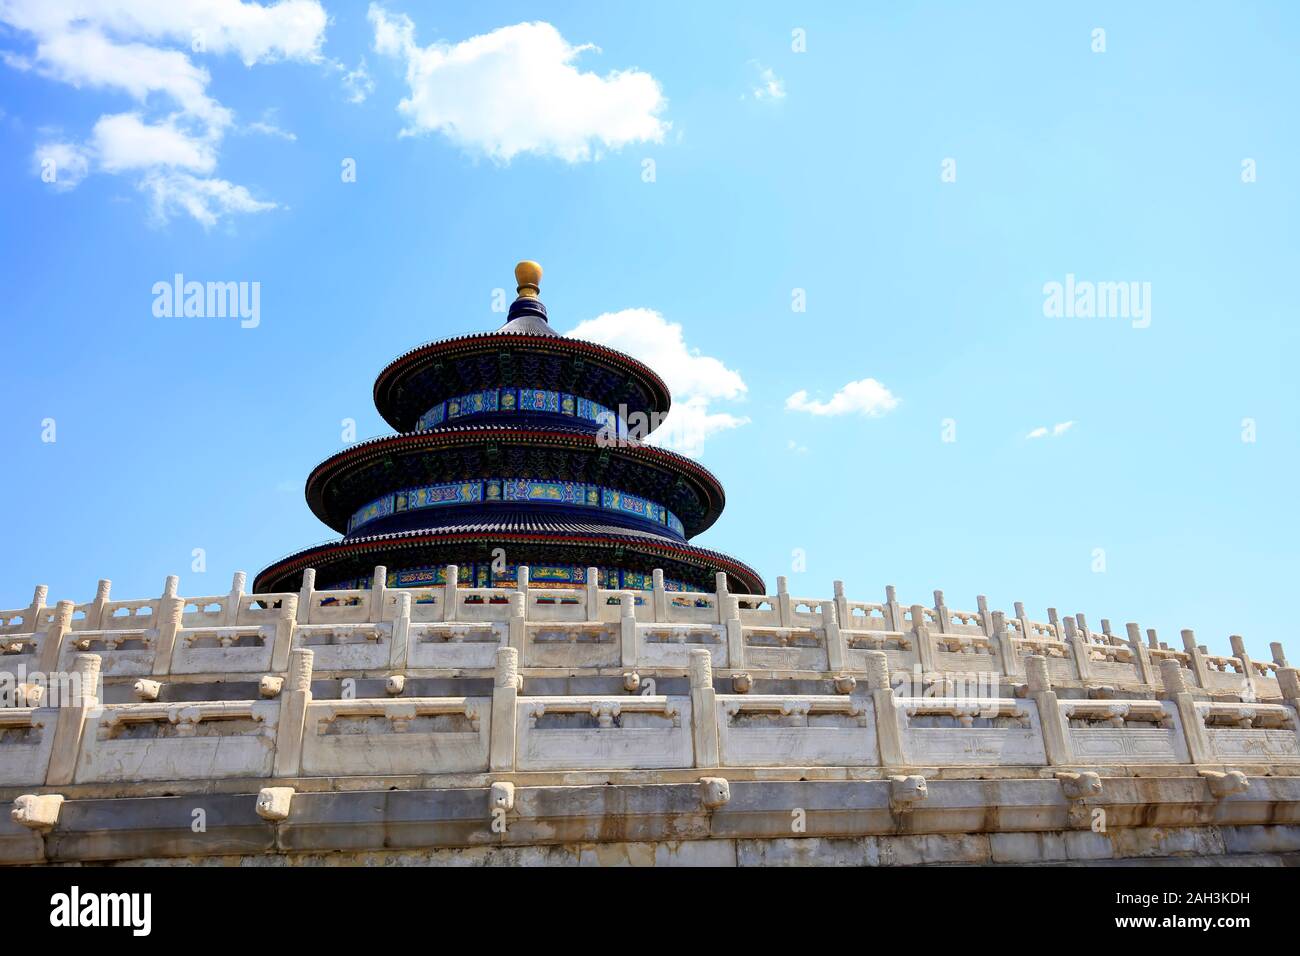 The temple of heaven in Beijing, China Stock Photo - Alamy